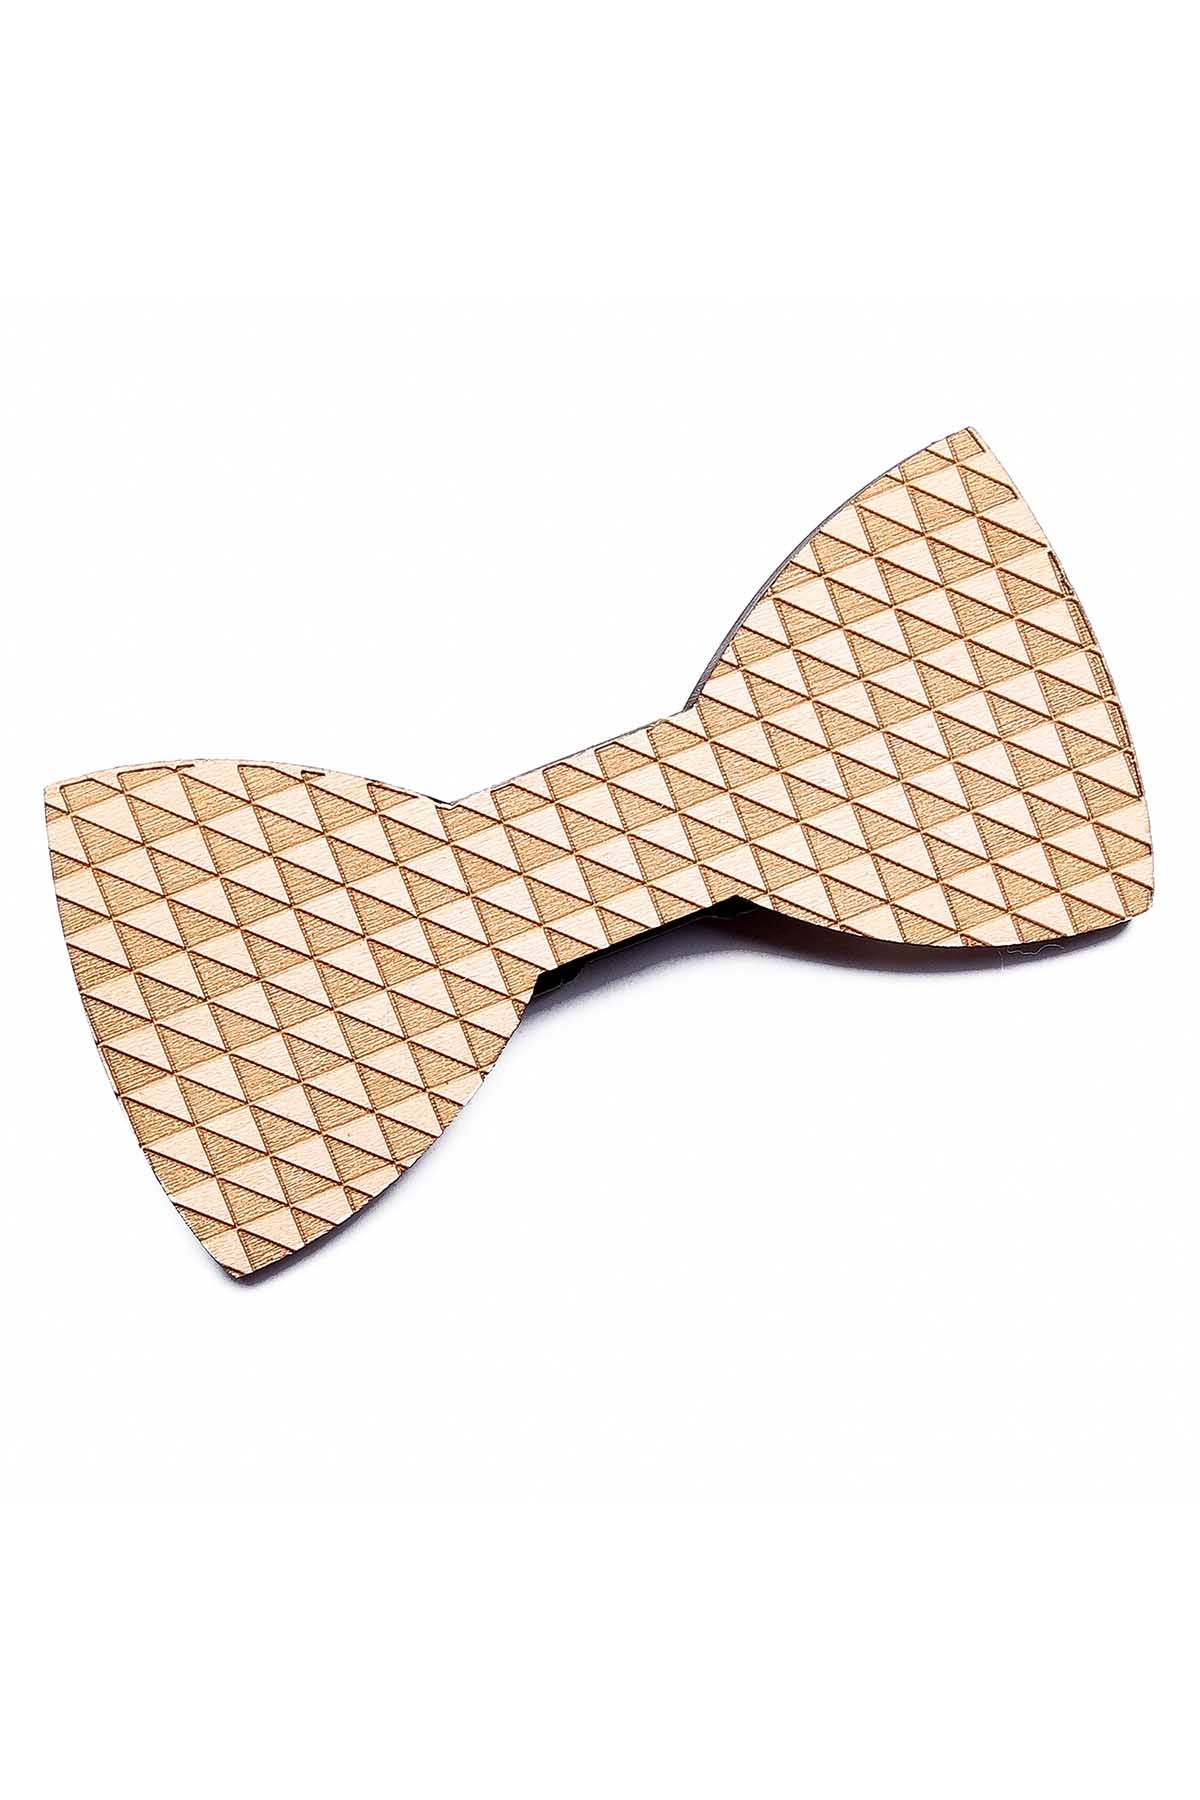 Brand Breeders Brown Geometric Squares Wooden Bow Tie